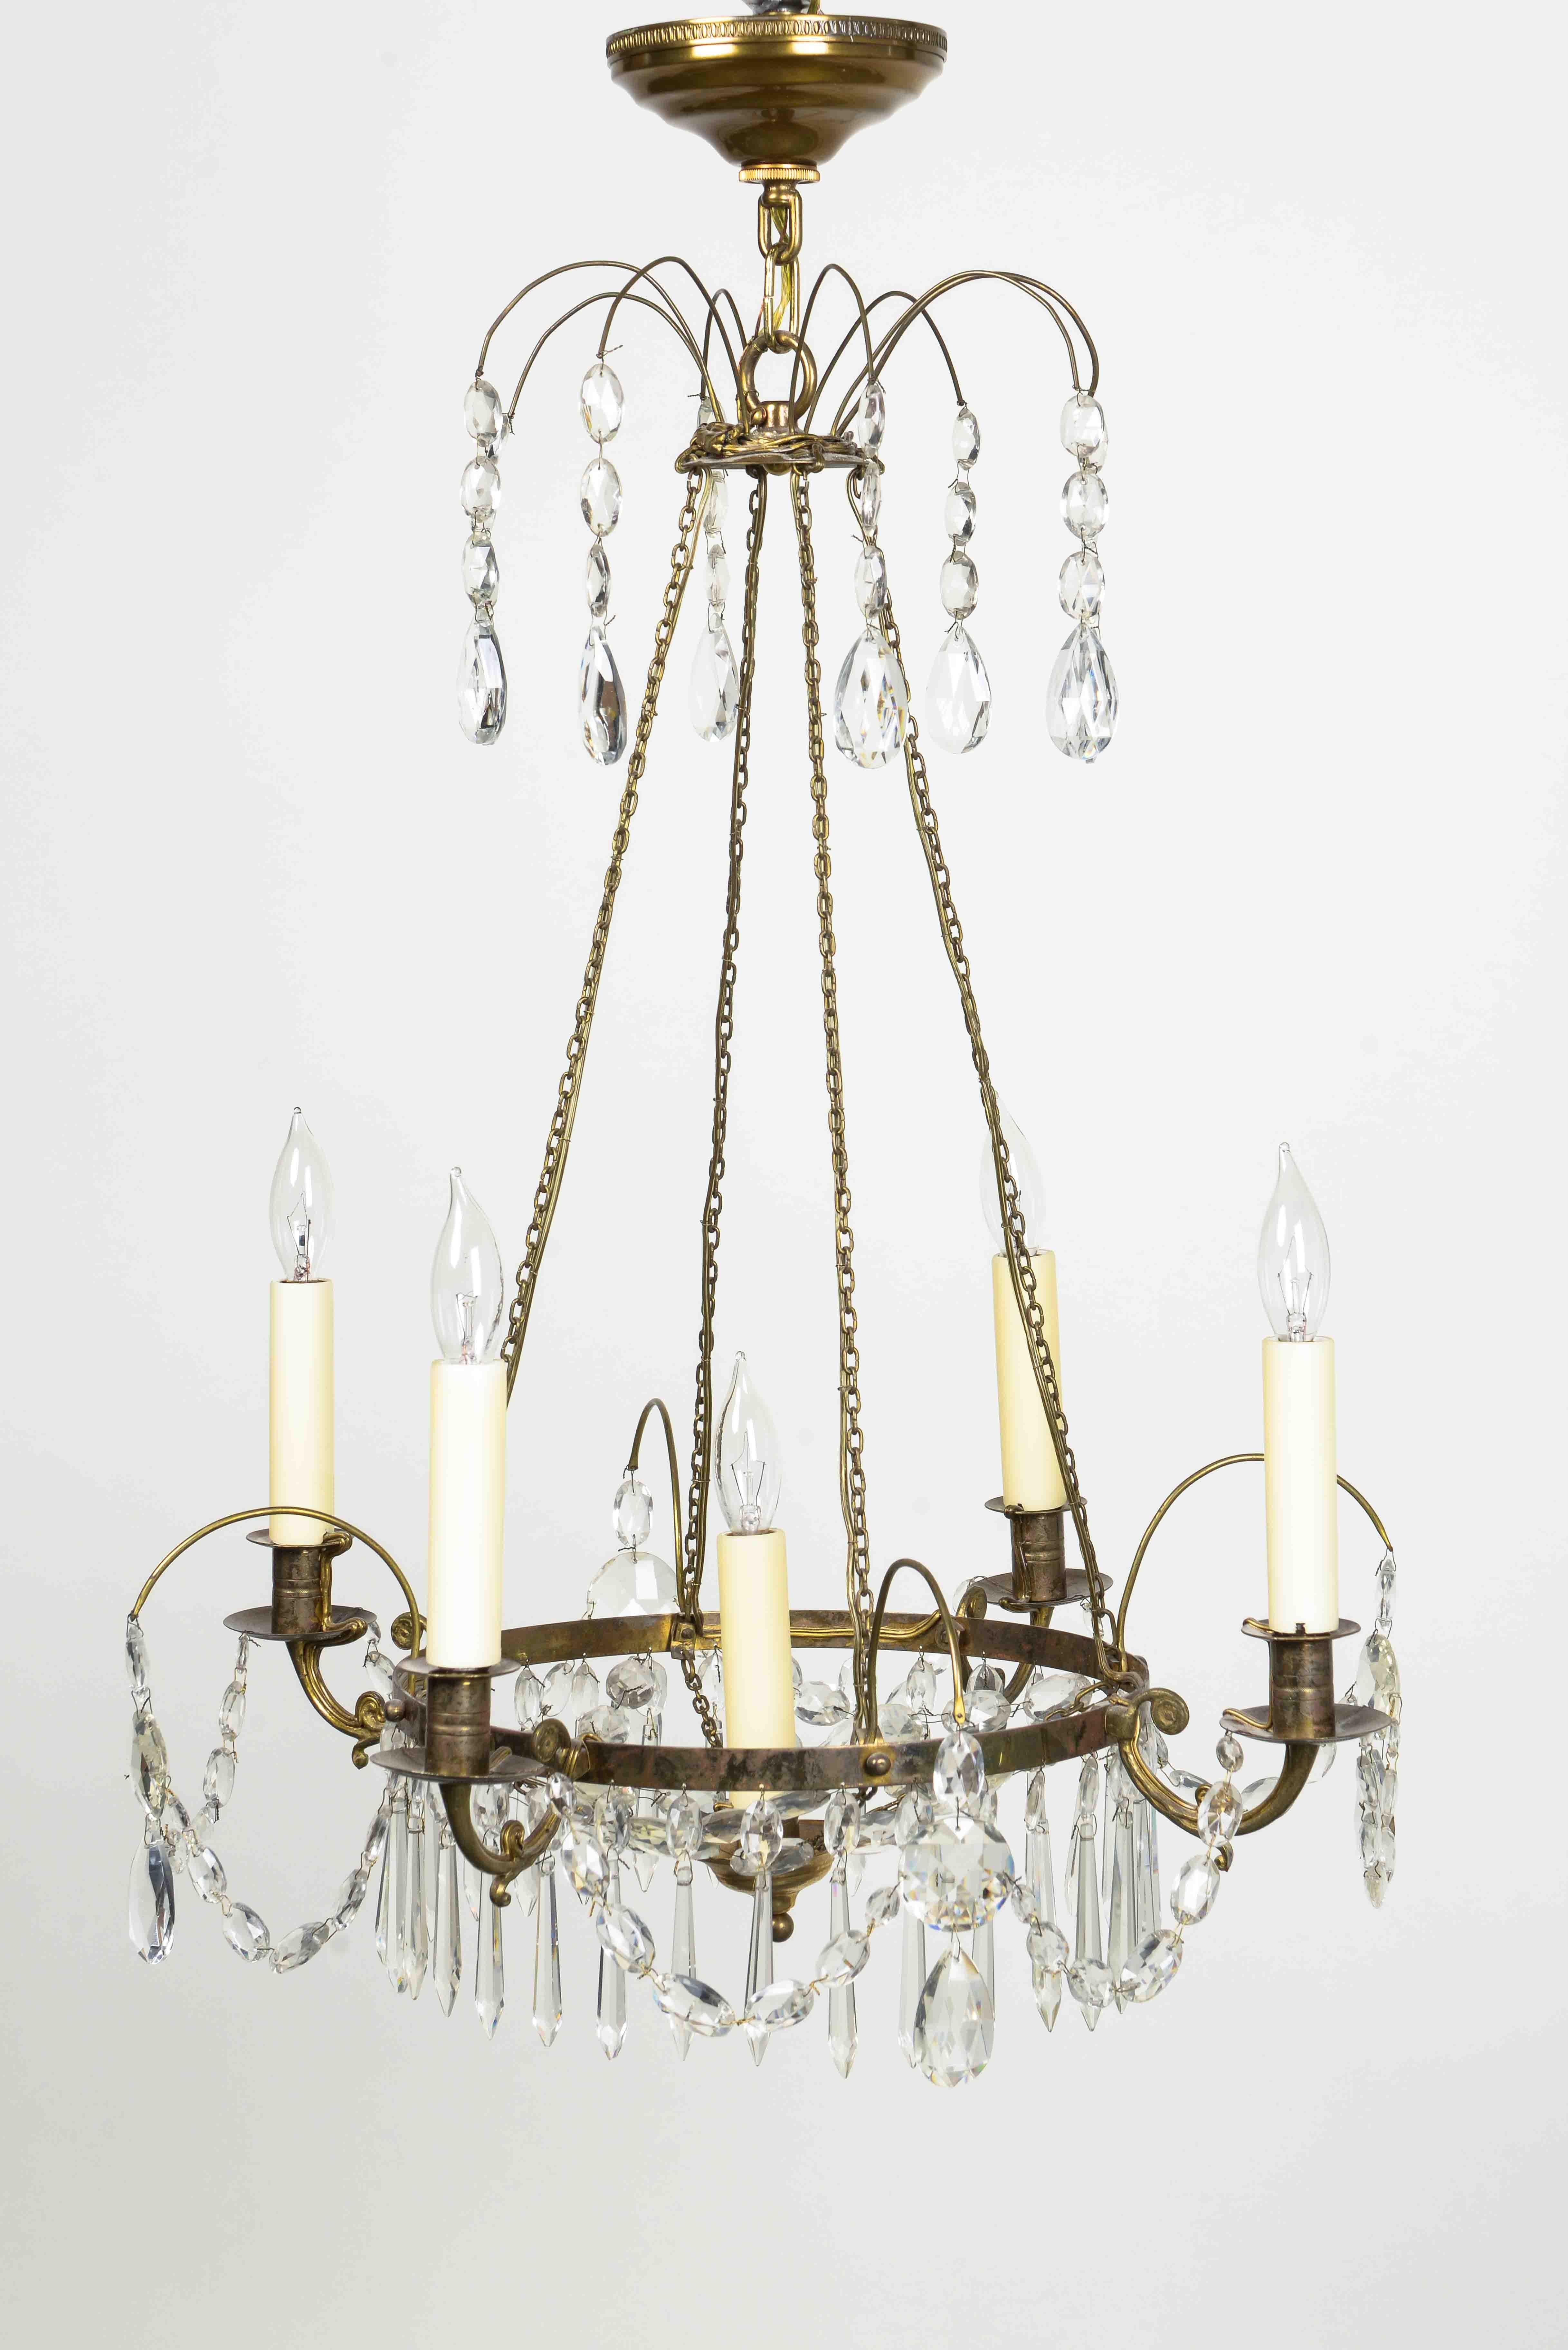 With a five outscrolled electrified candlearms issuing from a bronze ring hung with crystal beaded swags and drop pendants, hung from four chains suspended from a disc issuing arched cut glass pendants; with canopy. Fitted with five candelabra bulb